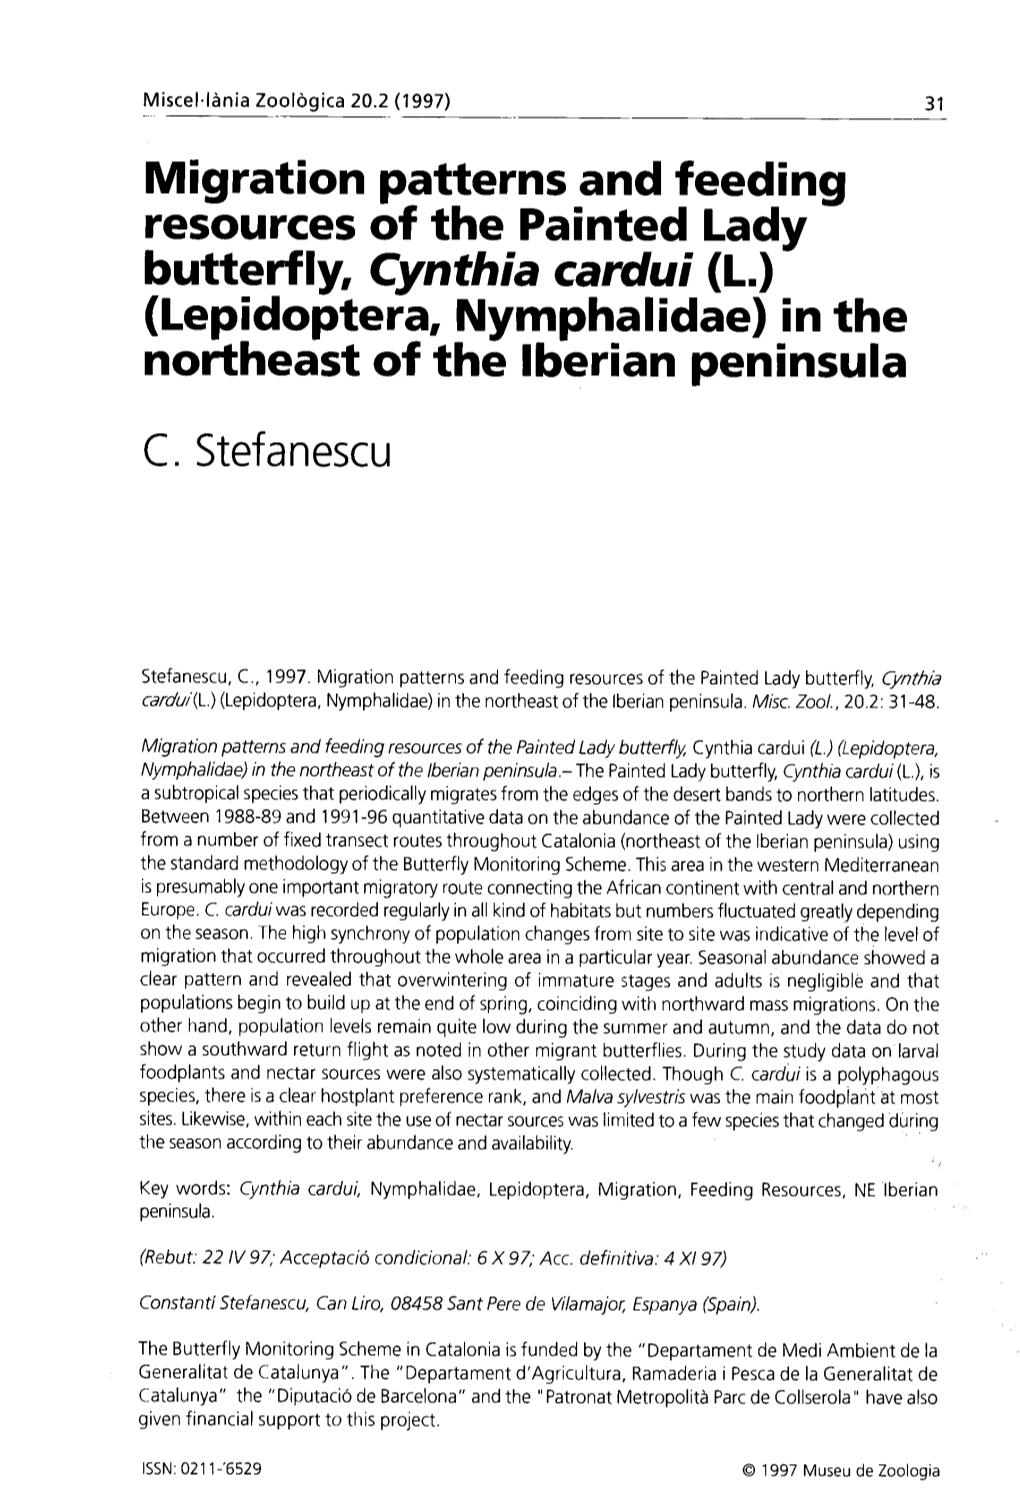 Butterf Ly, Cynthia Cardui (L.) (Lepidoptera, Nymphalidae) in the Northeast of the Lberian Peninsula